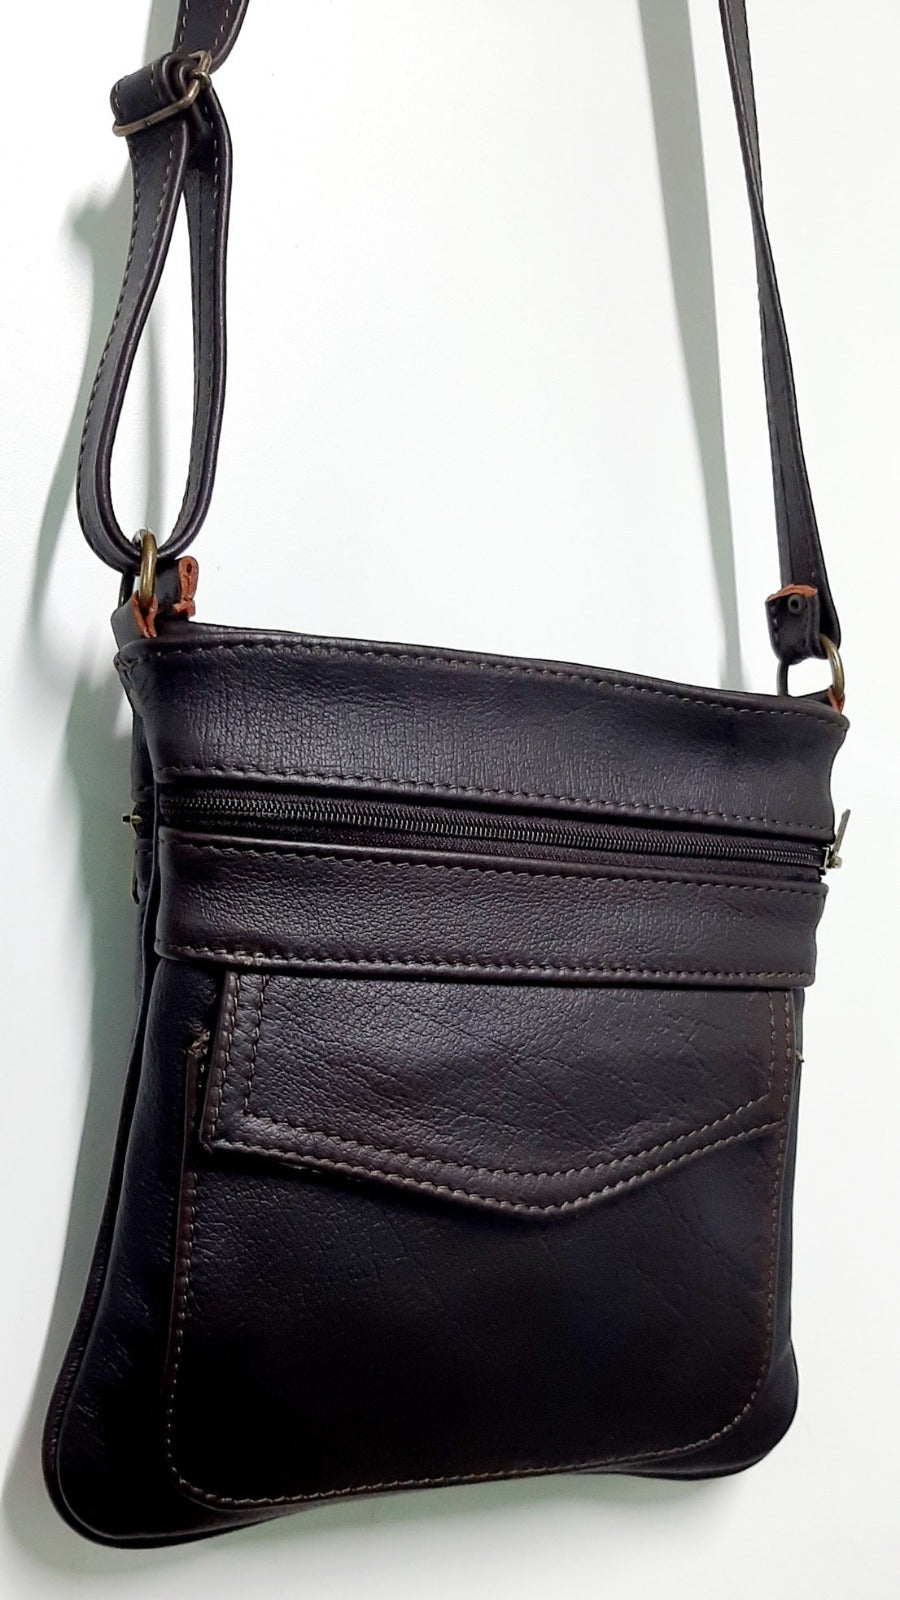 A beautiful genuine leather Leony sling bag hanging at Cape Masai leather factory shop 